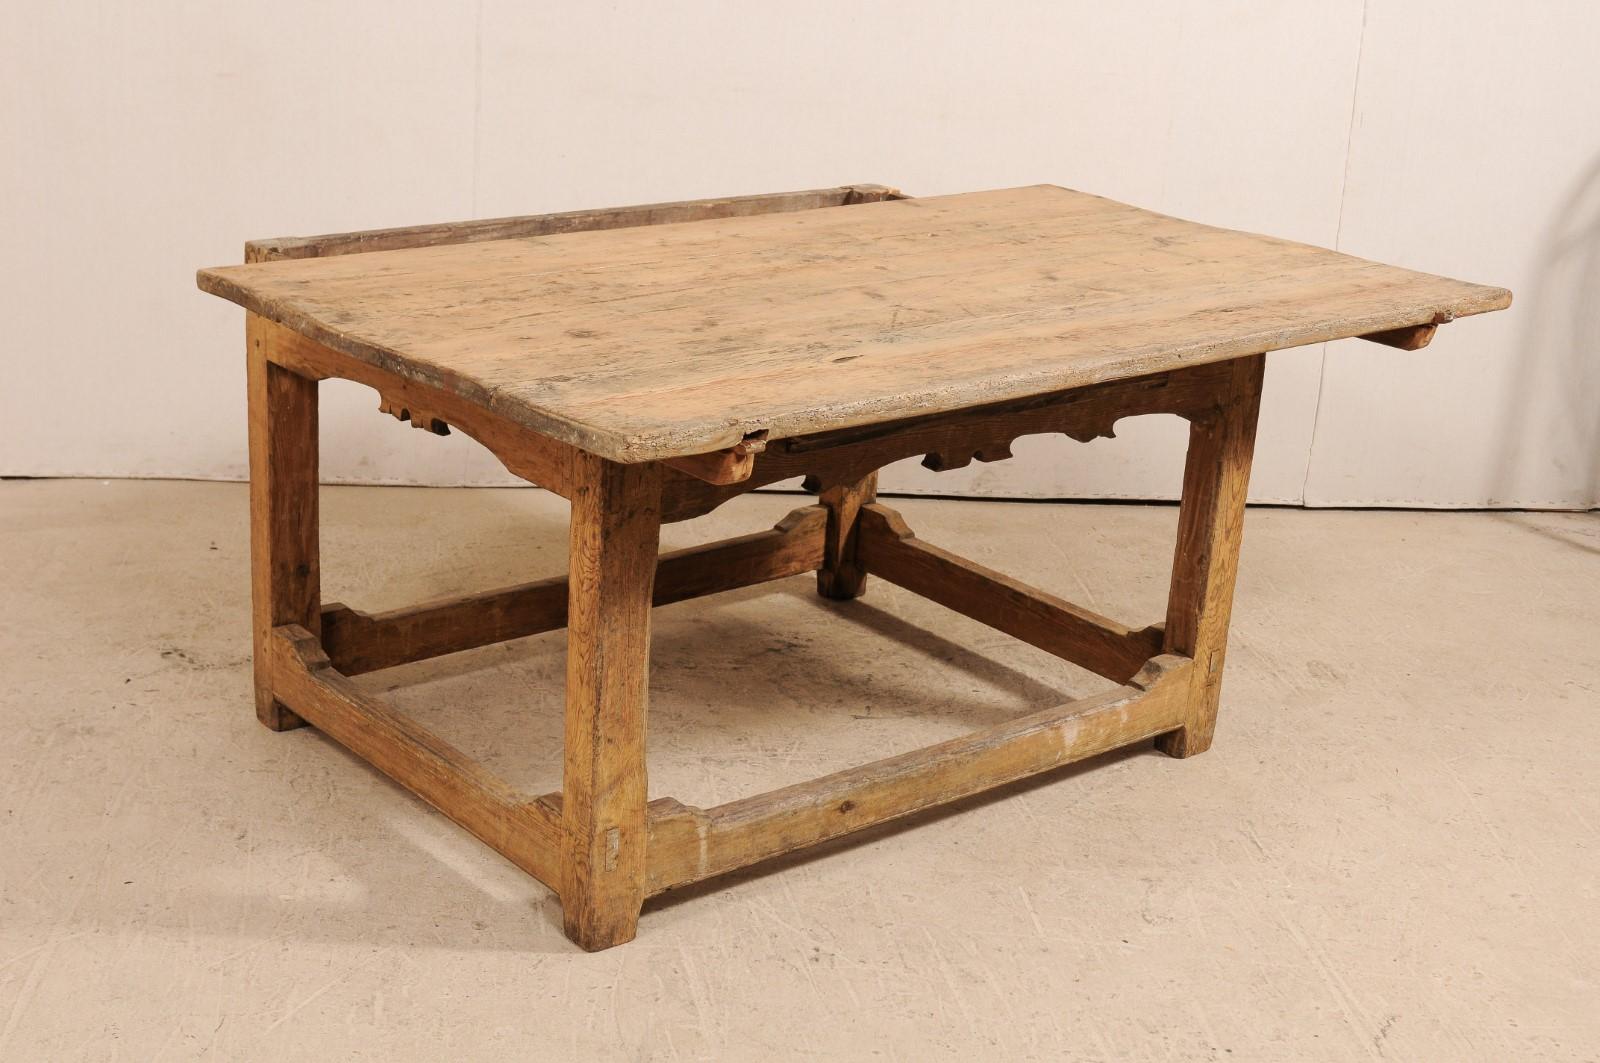 Early 19th Century Swedish Carved Wood Desk Table with Drawer In Good Condition For Sale In Atlanta, GA